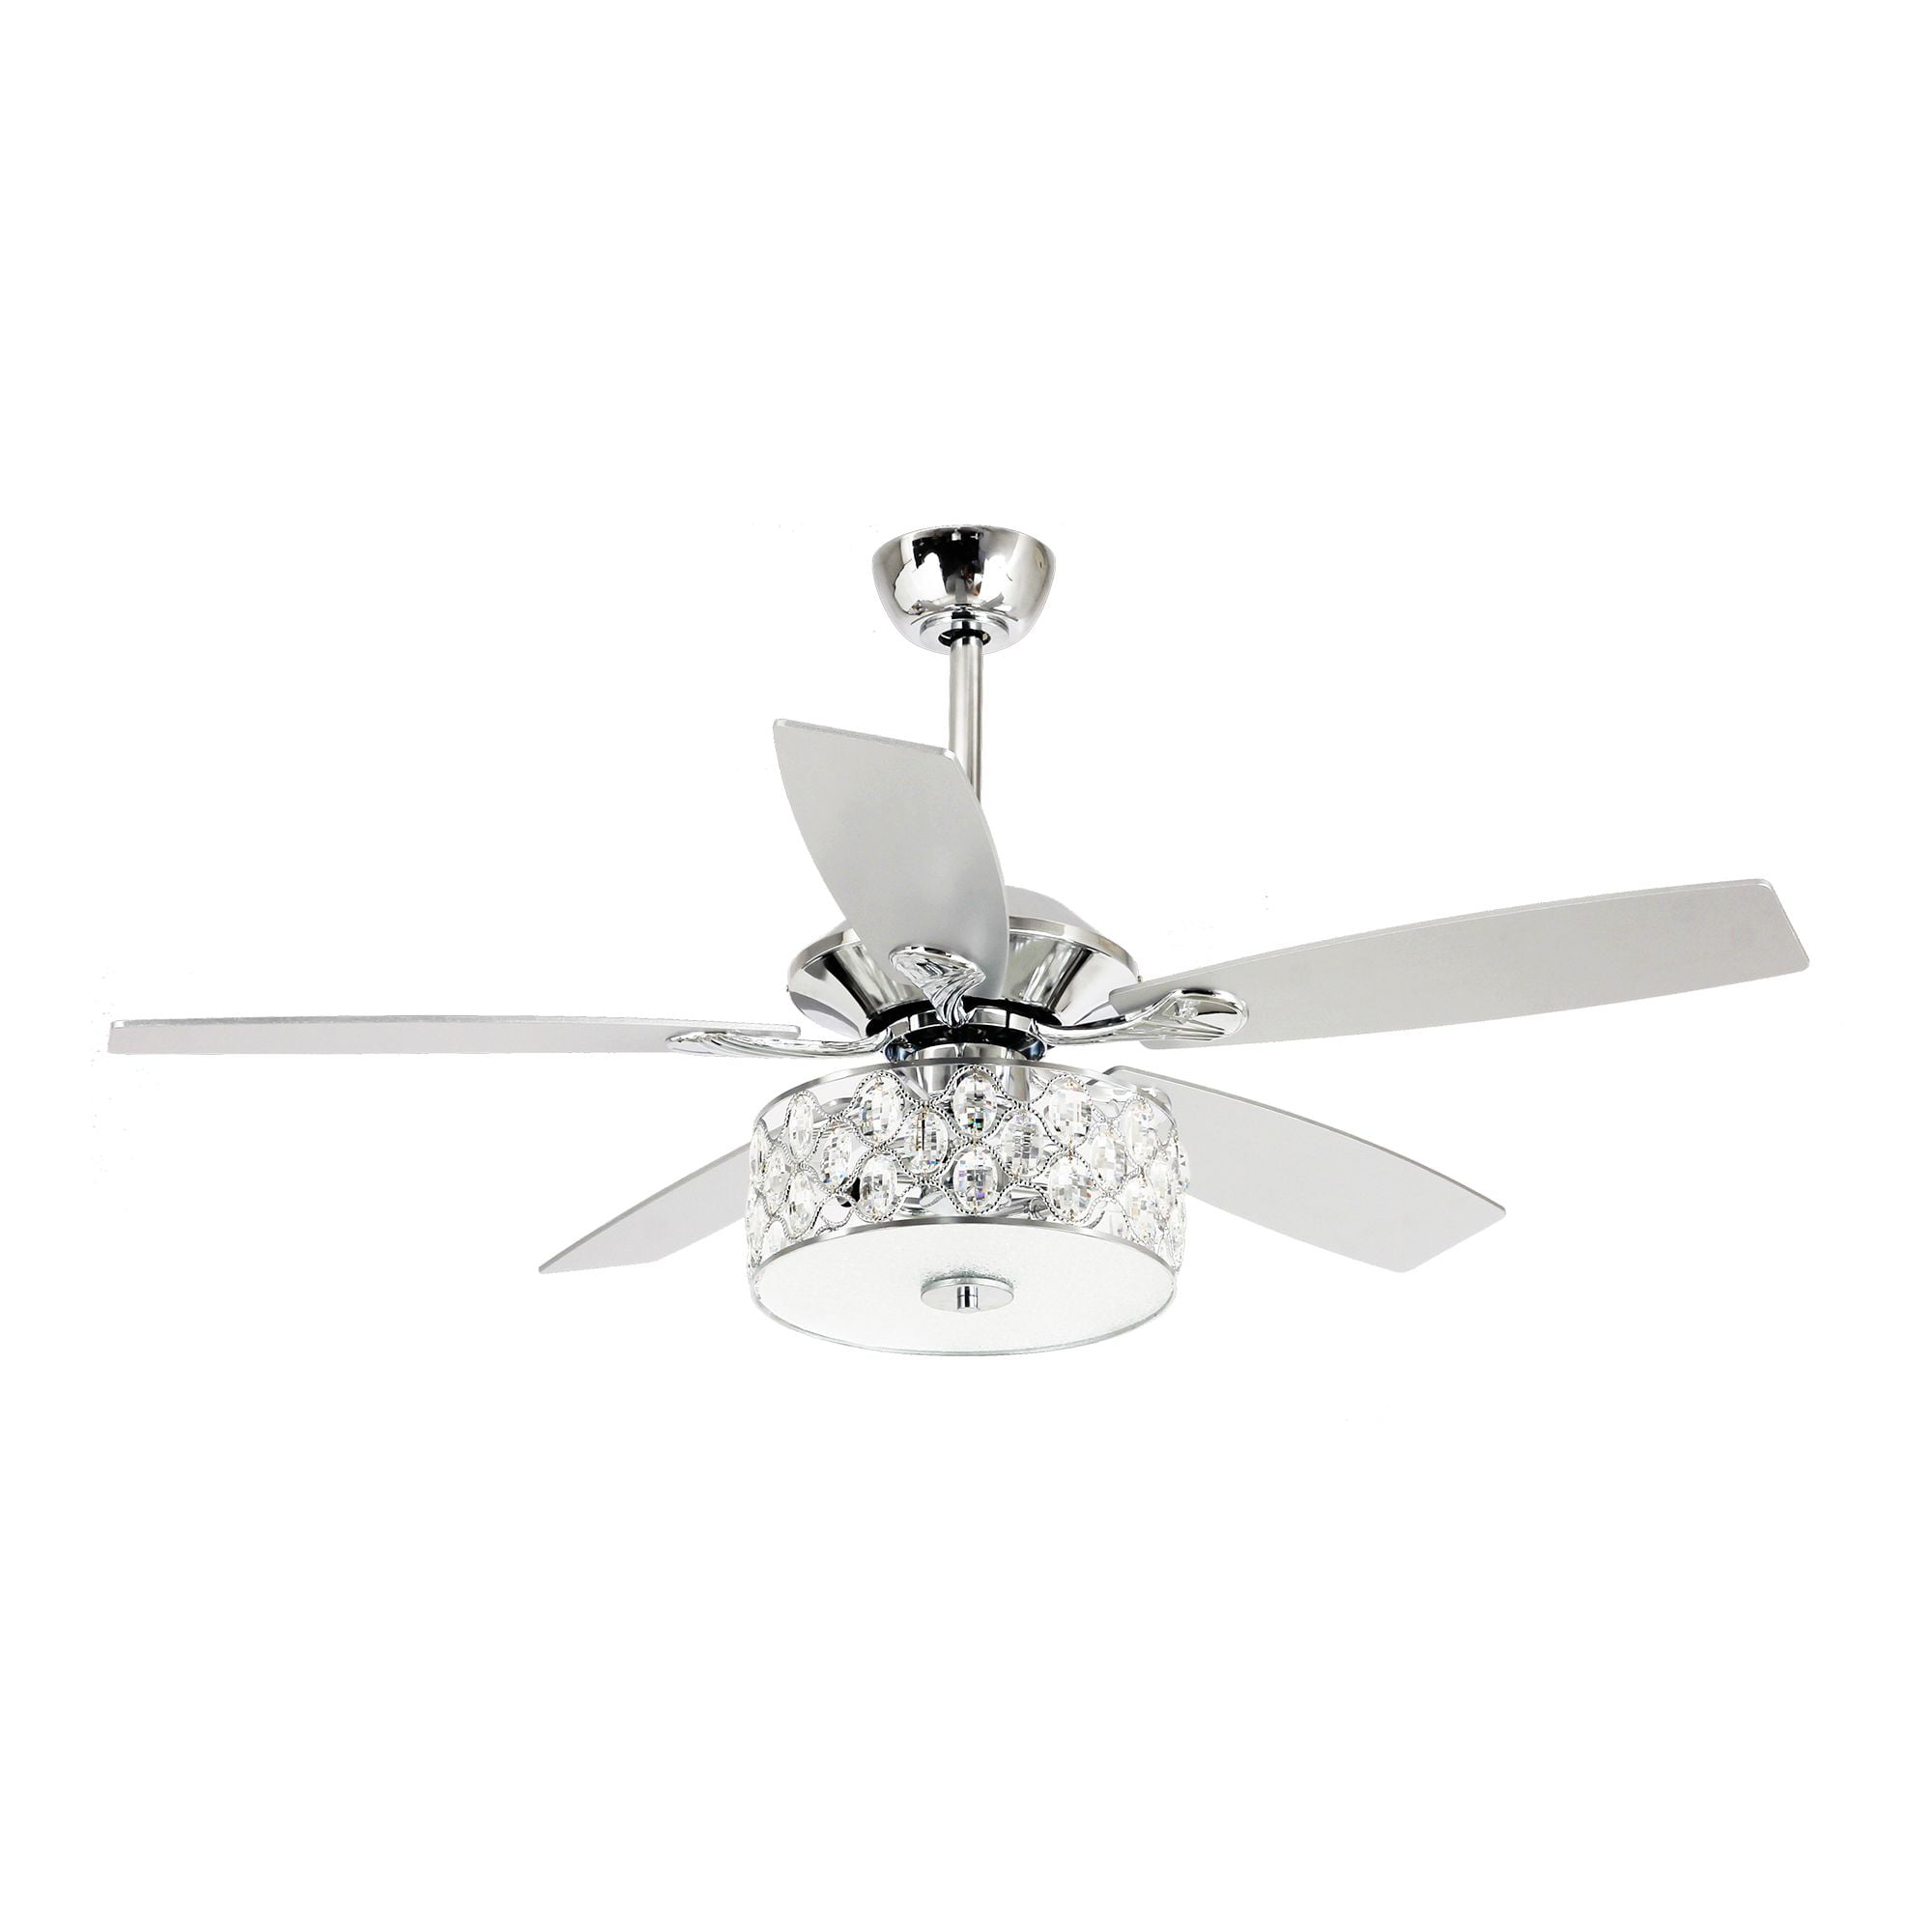 Details about   52" Retro Ceiling Fan Light 5 Wood Blades Lamp Crystal Shade Chandelier w/Remote 